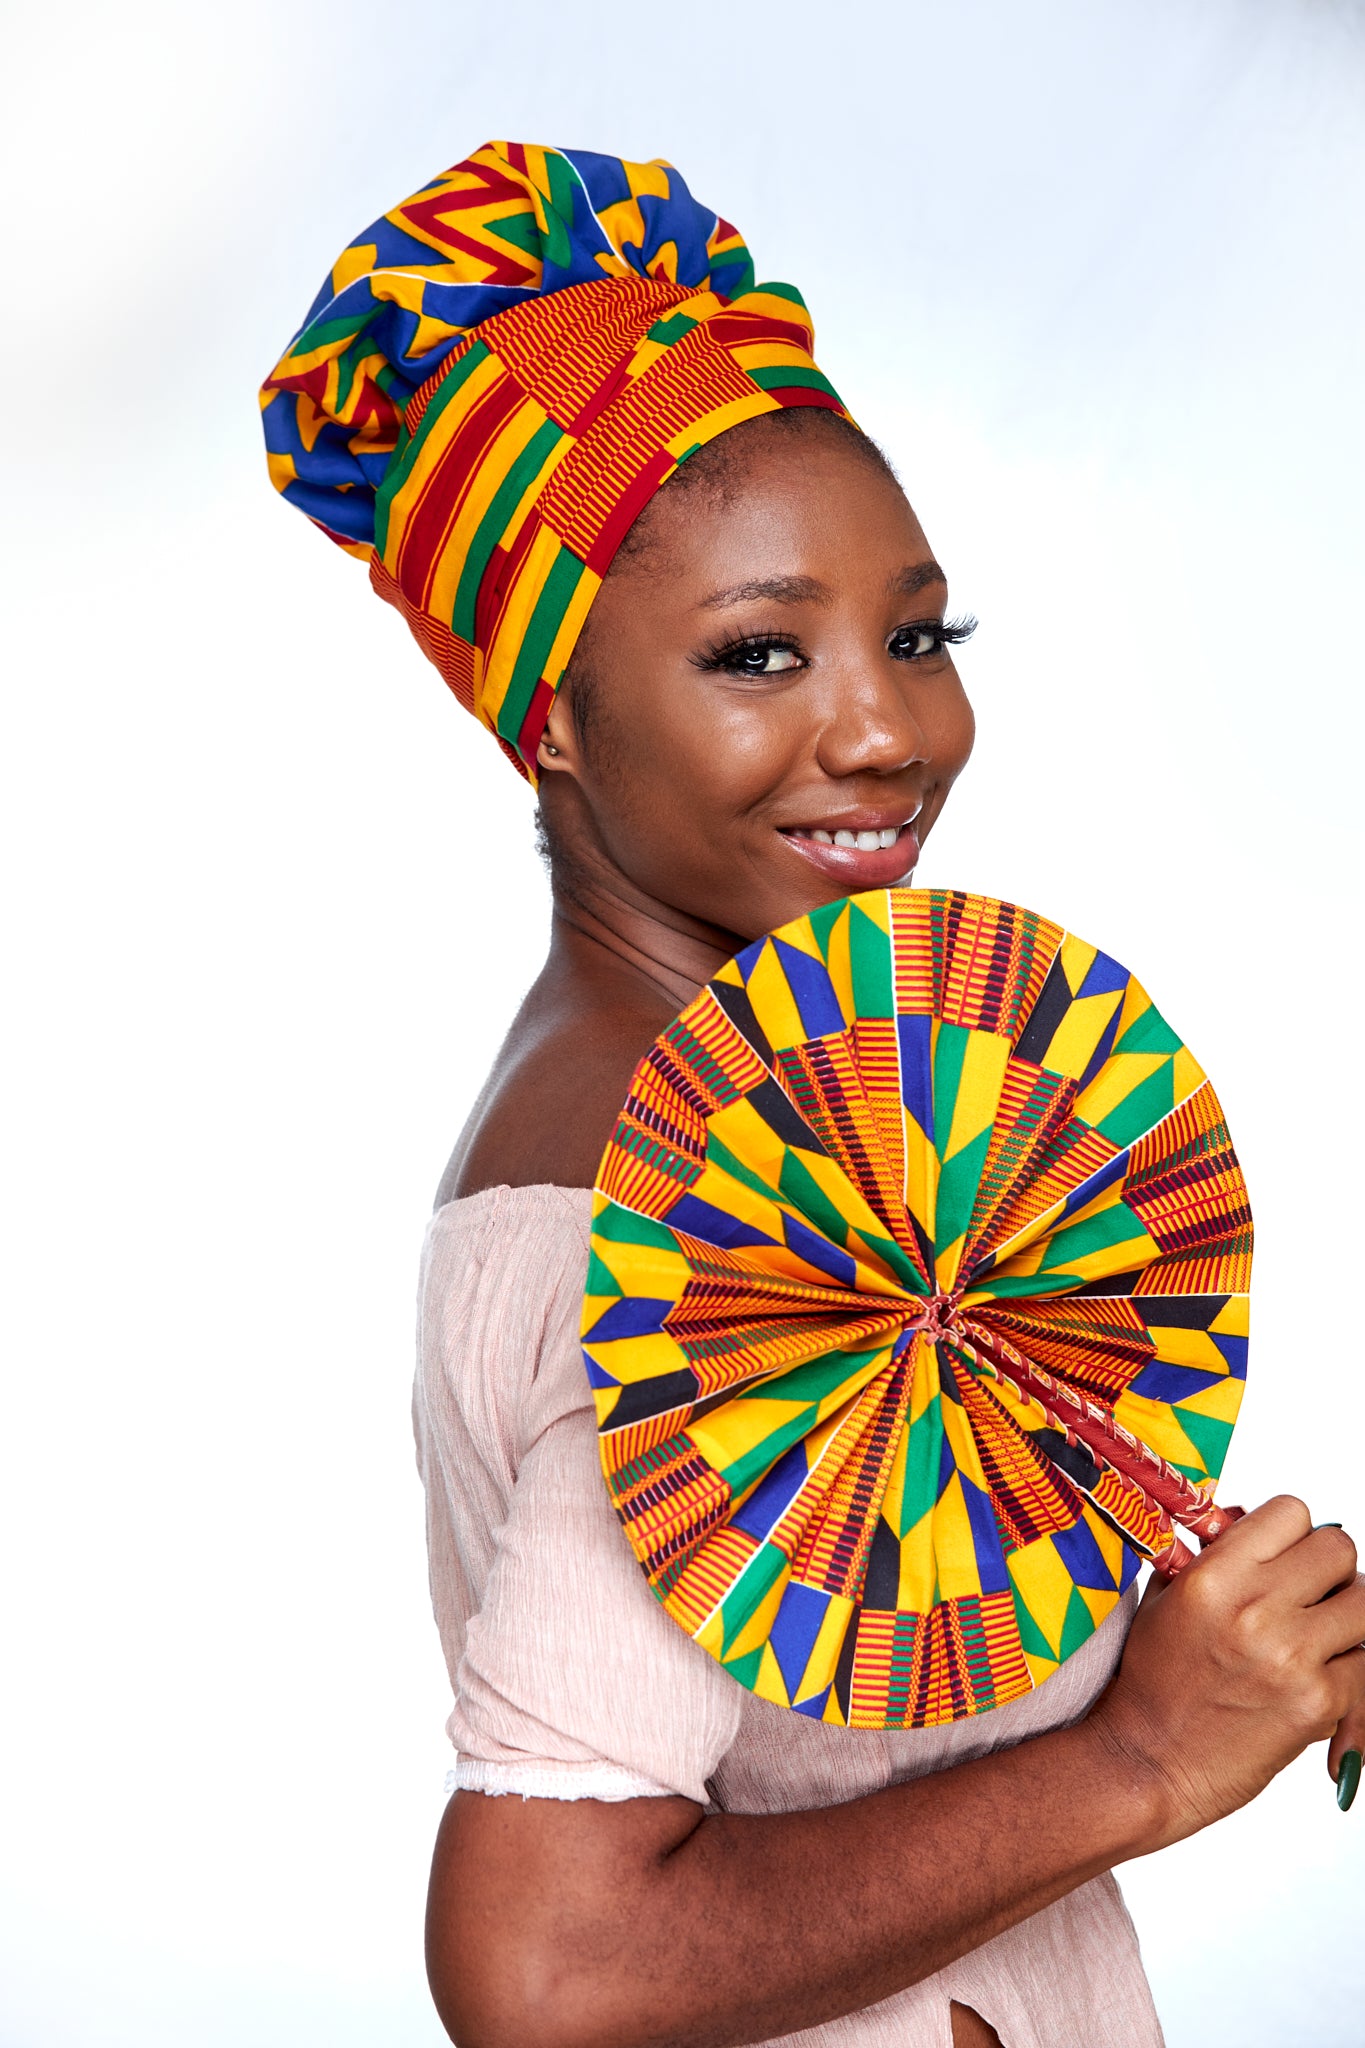 A Ghanaian Wax Print Made of Blue, Green, Red and White Blended Beautiful Colours And Pattern, Hand Made Elastic Silklined Bonnet With Band